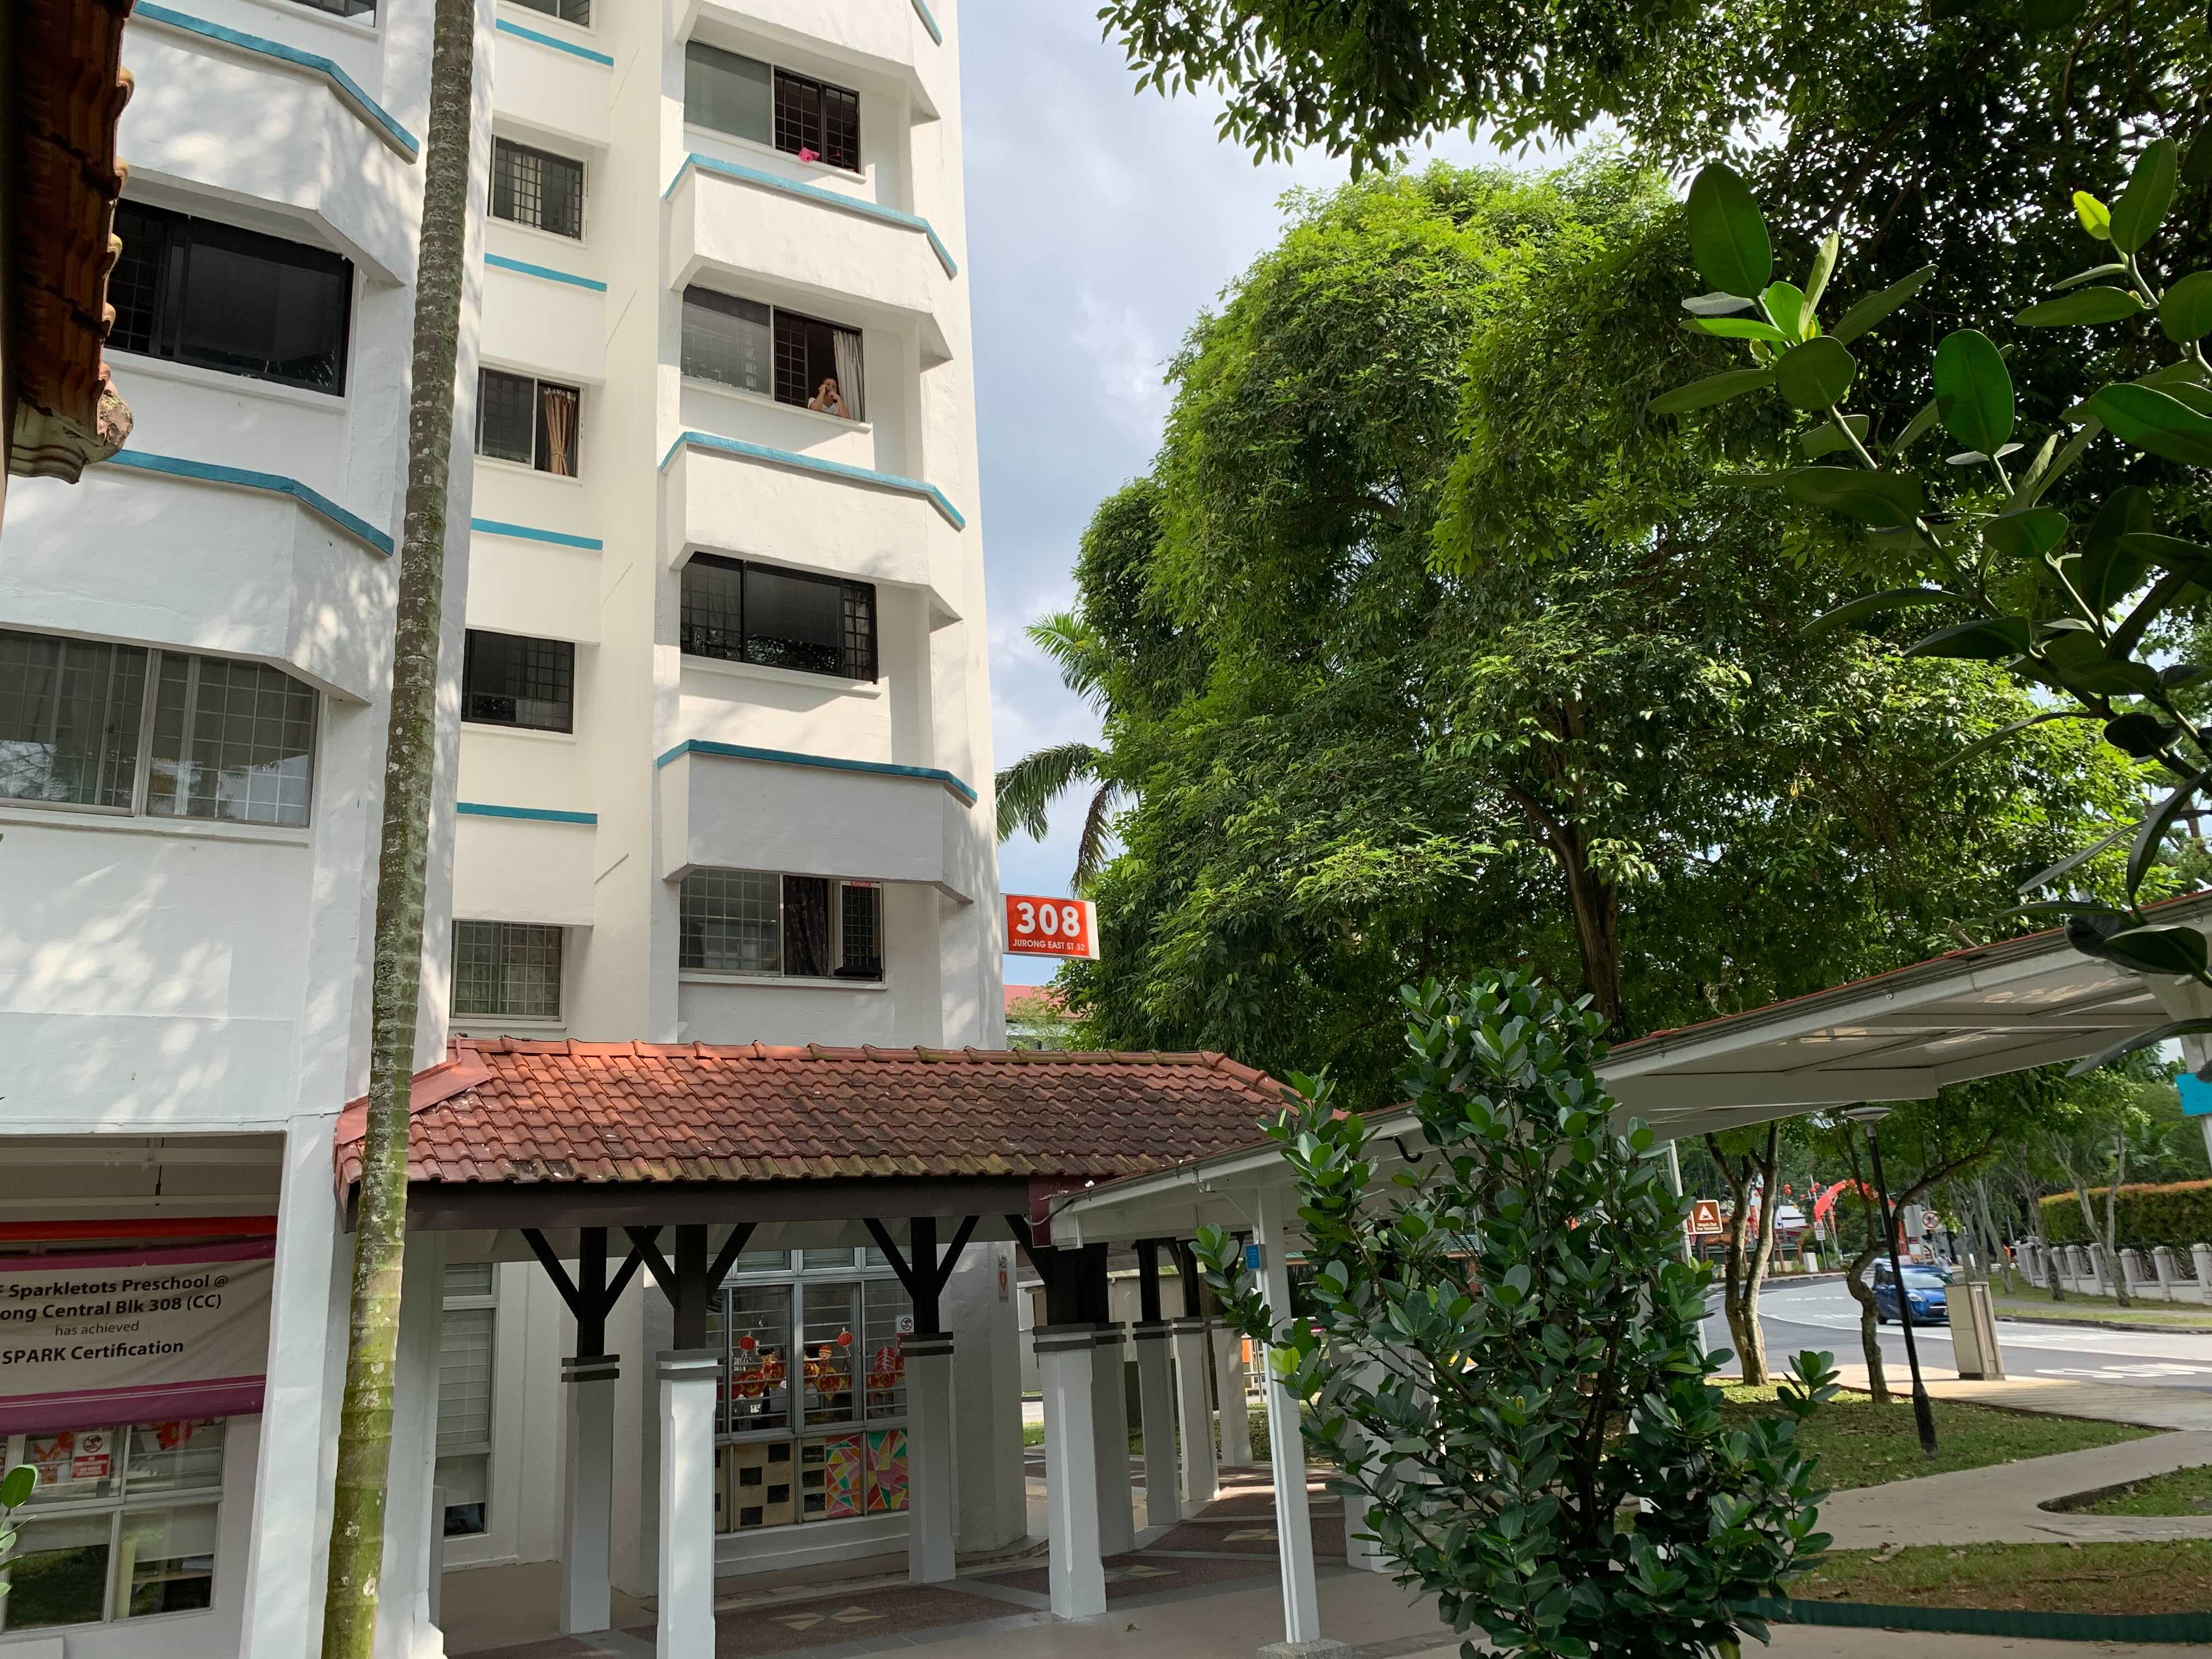 A view of Block 308 Jurong East Street 32. Tham Mee Yoke was stabbed at the void deck of the block in February 2021.